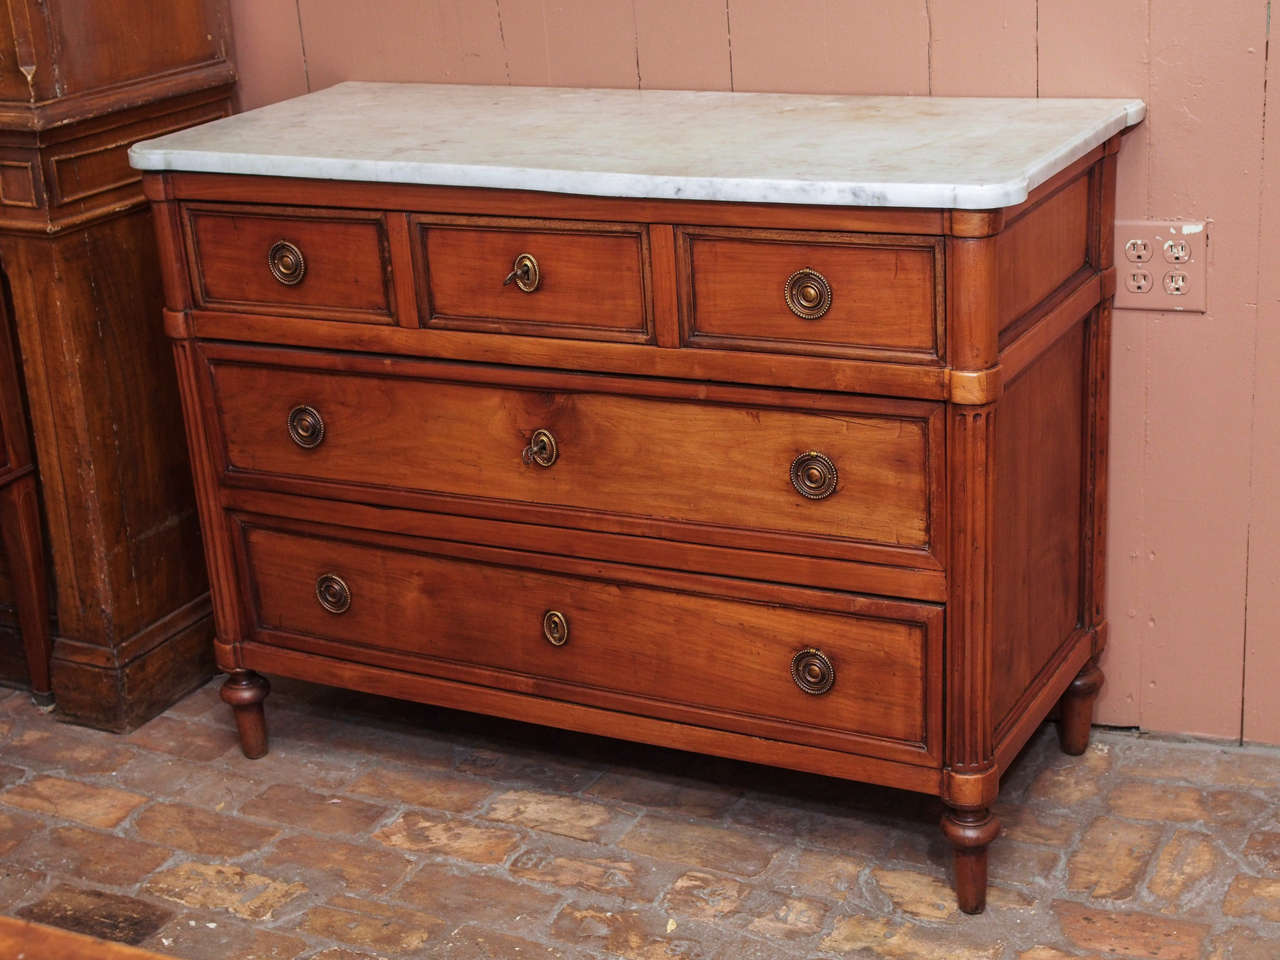 Late 18th century French Directoire period walnut three-drawer commode with white marble top, circa 1790